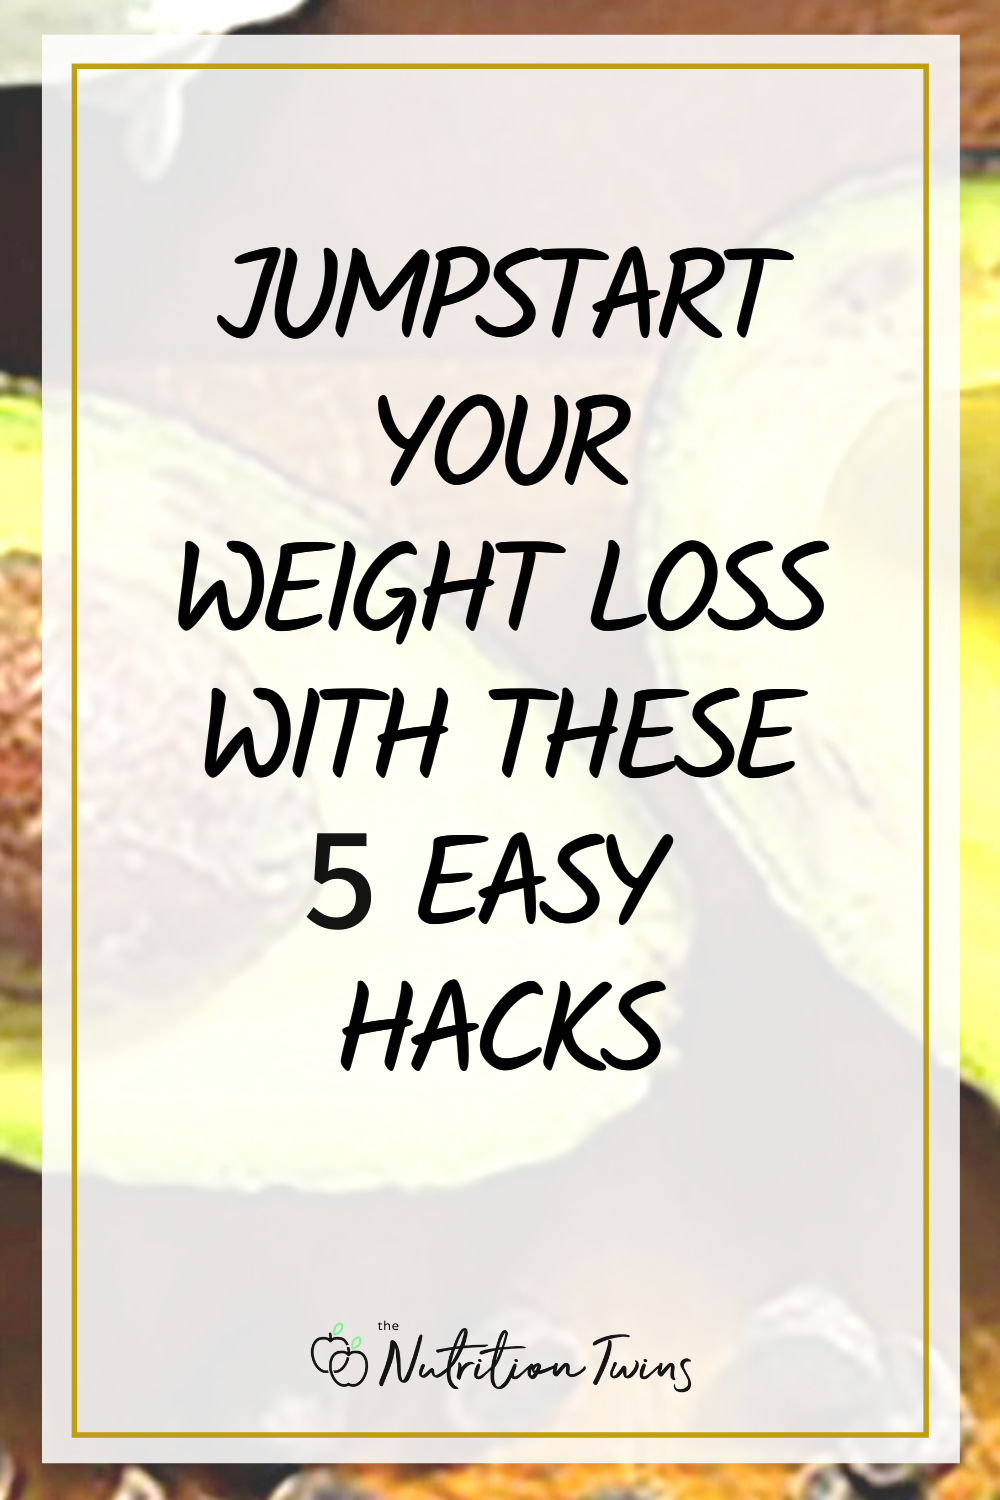 jumpstart your weight loss with these 5 easy hacks